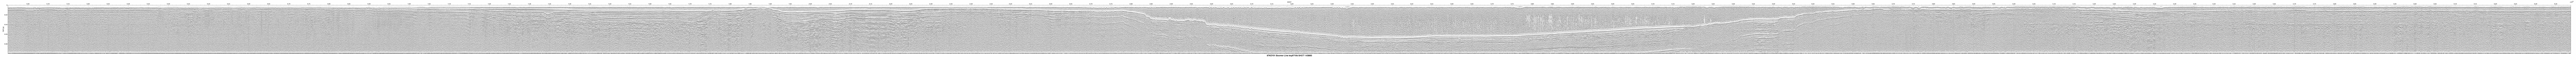 Thumbnail GIF image of the seismic trackline key9719b, with a hotlink to the more detailed, larger JPG image.